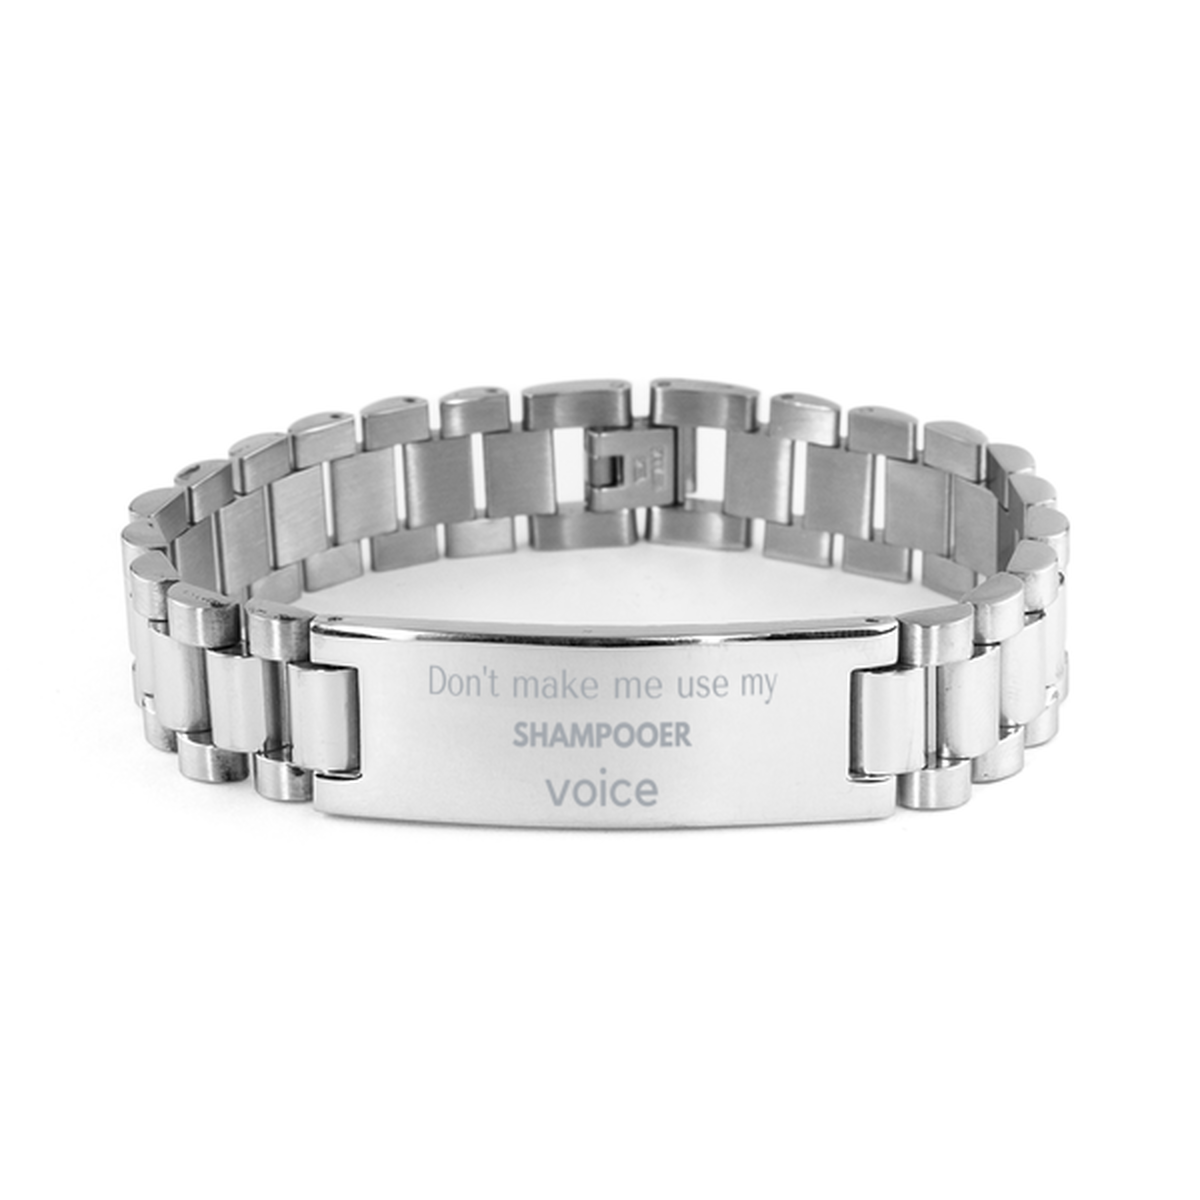 Don't make me use my Shampooer voice, Sarcasm Shampooer Gifts, Christmas Shampooer Ladder Stainless Steel Bracelet Birthday Unique Gifts For Shampooer Coworkers, Men, Women, Colleague, Friends